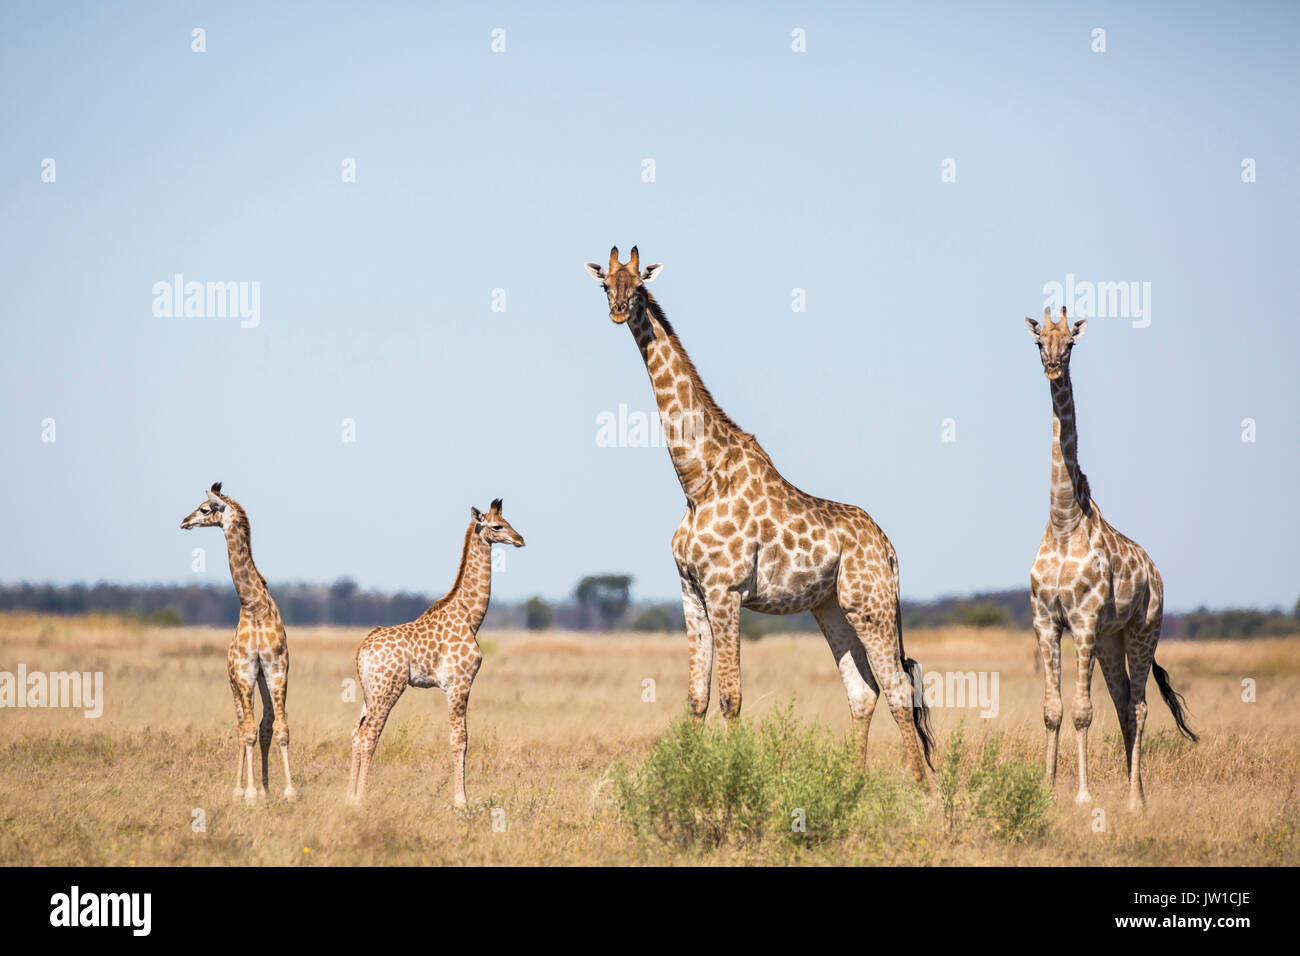 Two adult giraffes with two babies on an open grassland plain Stock Photo